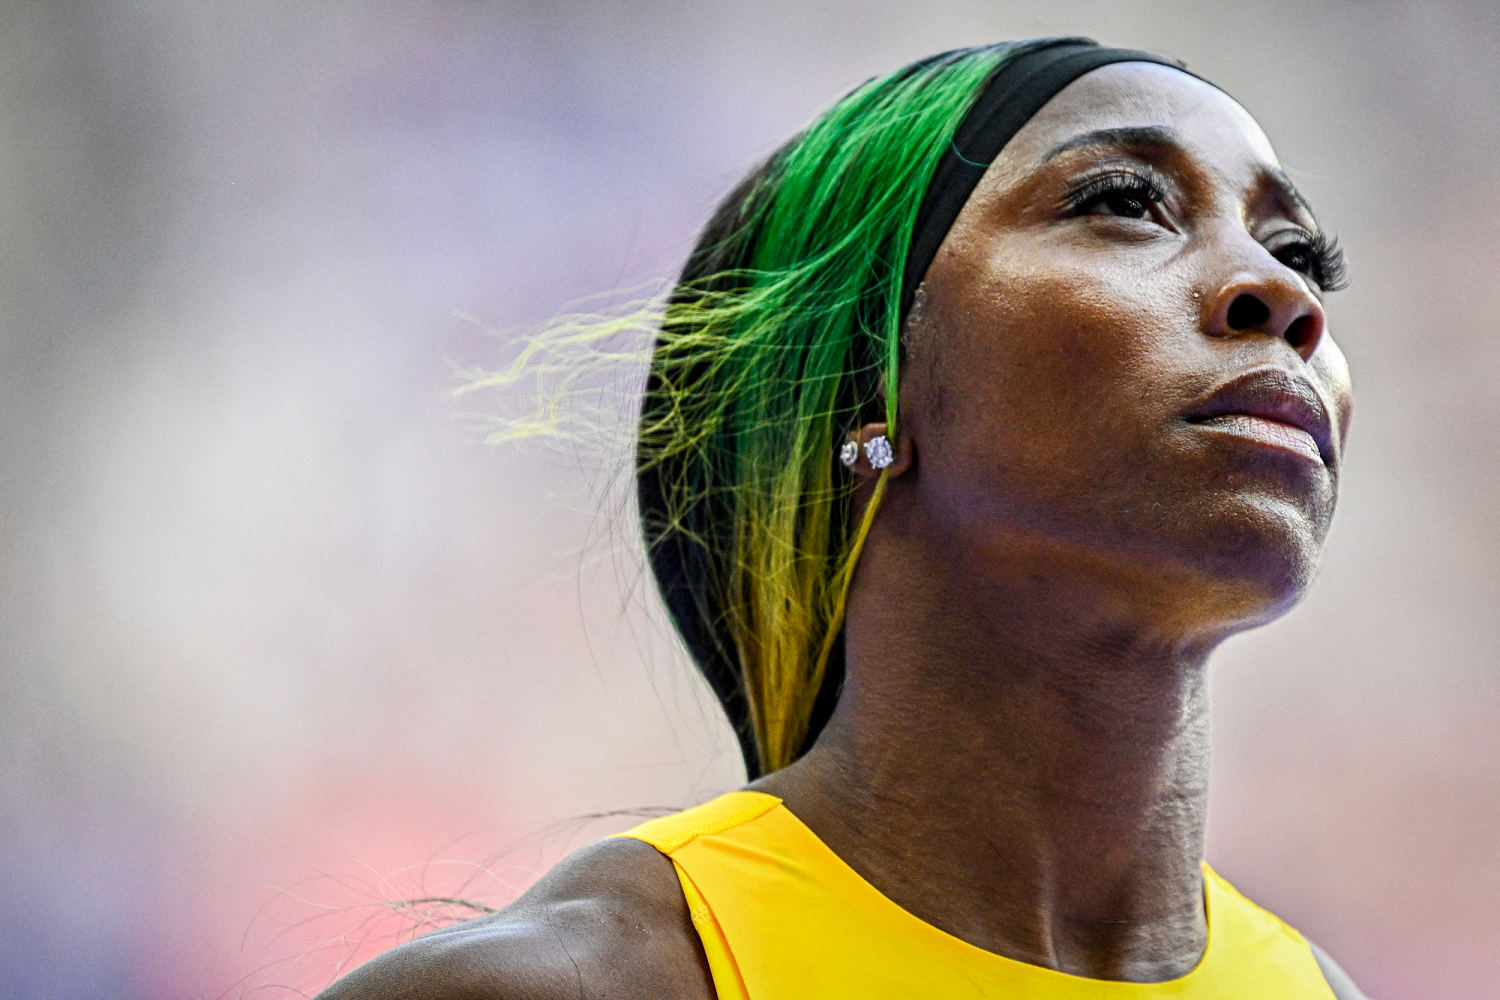 Jamaican sprinting great Shelly-Ann Fraser-Pryce unexpectedly out of 100-meters